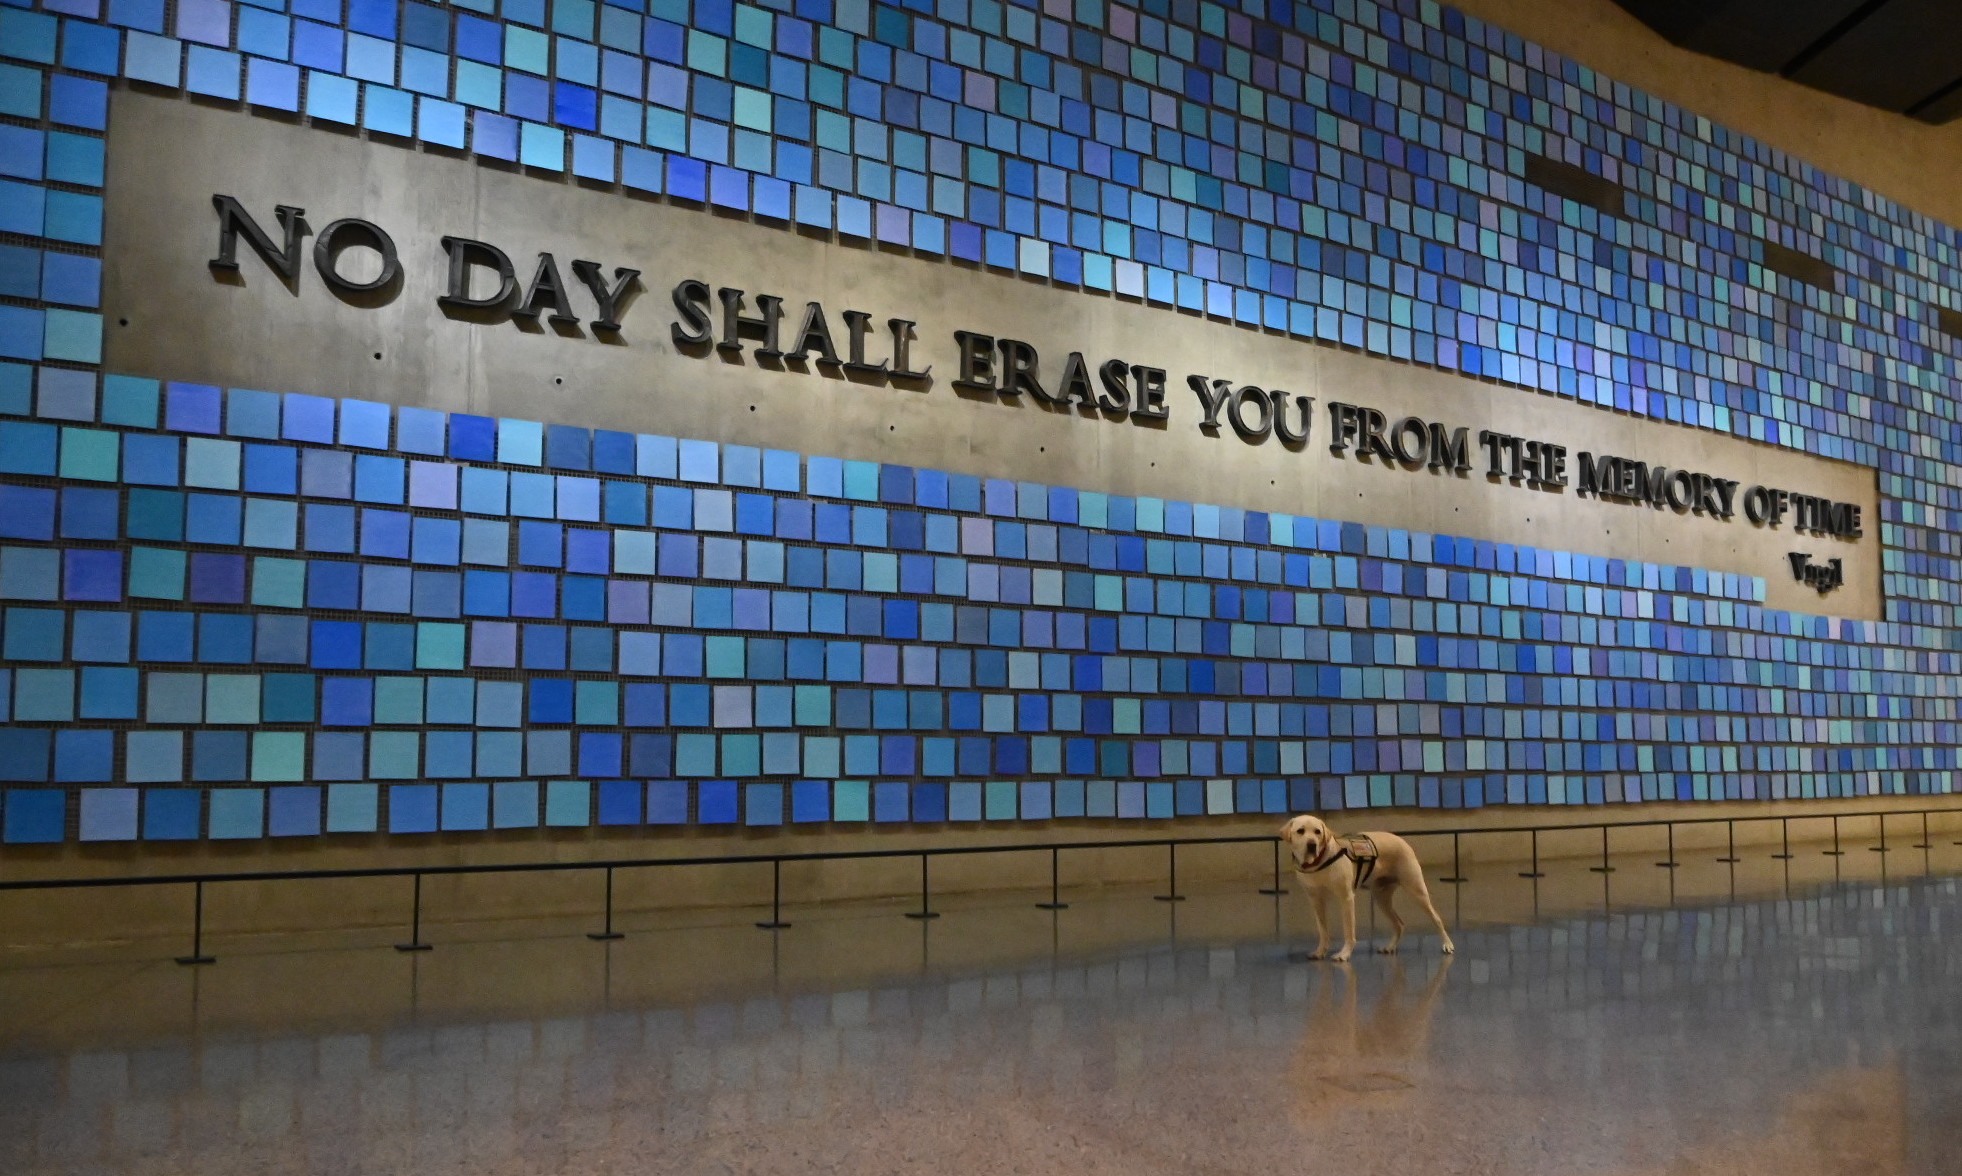 A yellow Labrador retriever stands in front of a large work of art consisting of many squares in varying shades of blue, with "No day shall erase you from the memory of time" emerging from the squares as iron lettering. 